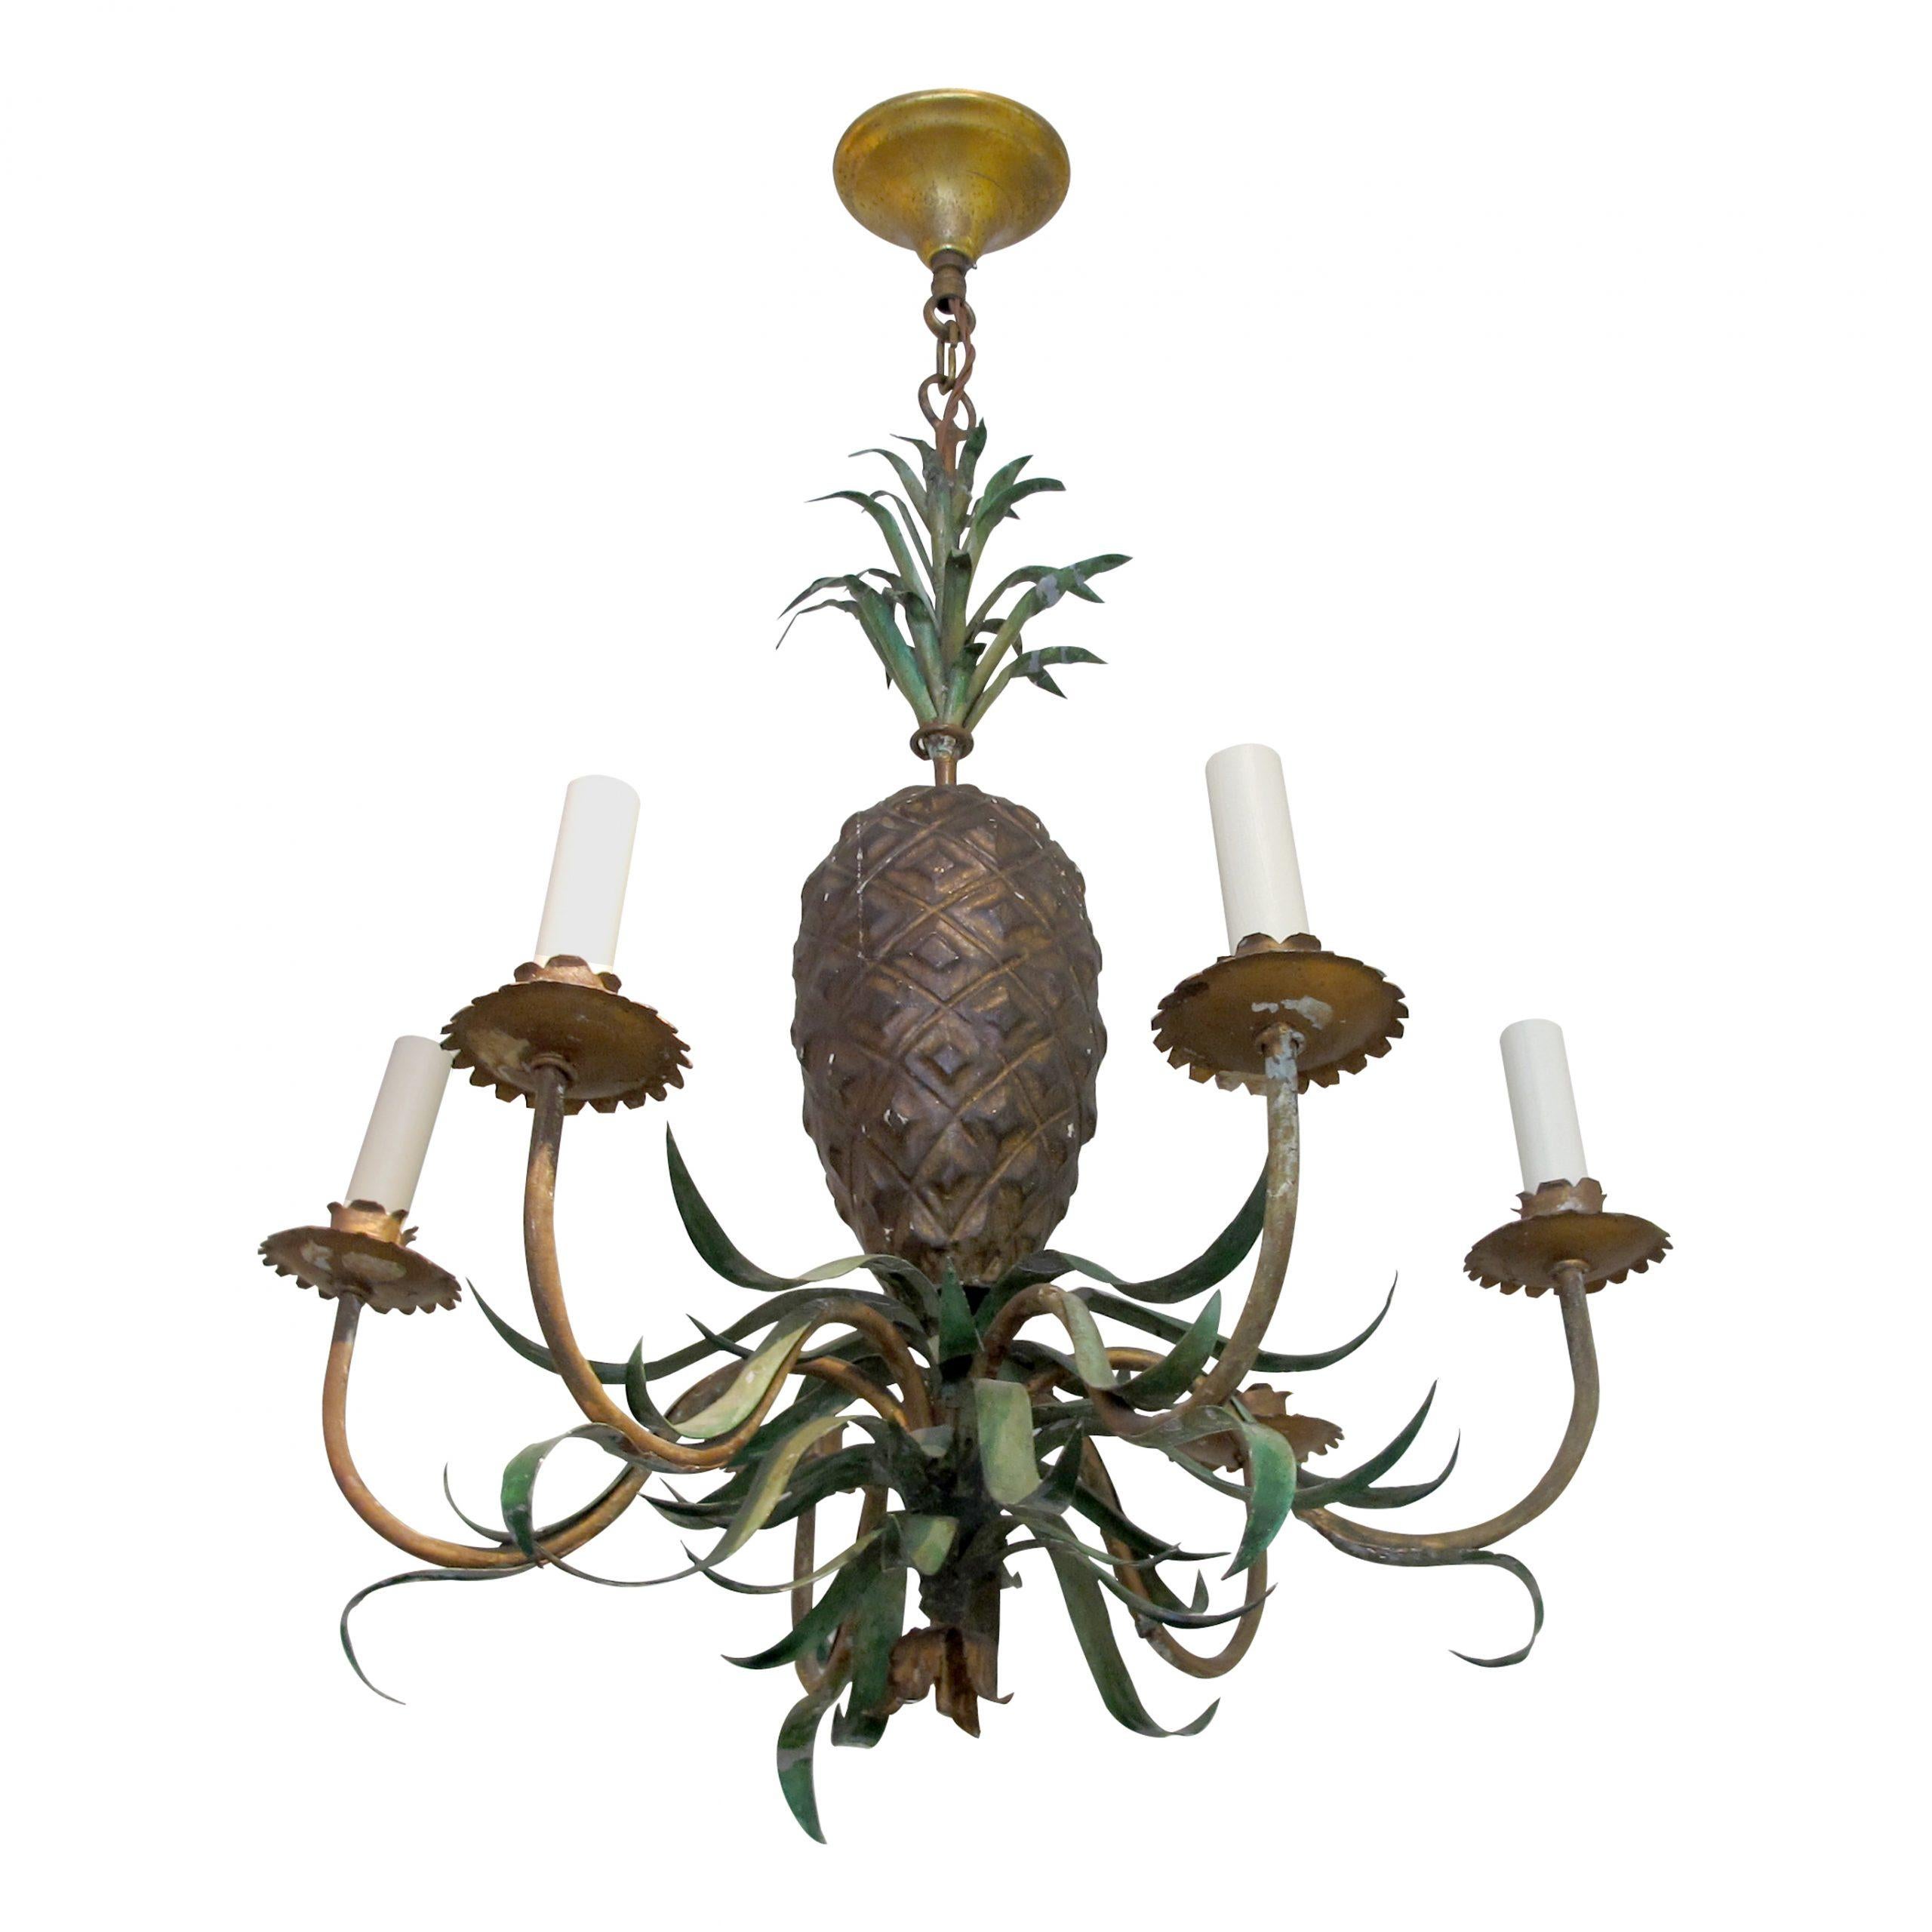 Hand-crafted mid-century French pineapple-shaped metal chandelier with six branches. The realistic hand-painted green metal leaves have acquired a beautiful patina commensurate with age.

Size: H80 cm x W60 cm x D60 cm 
6 Light bulb fitting -small